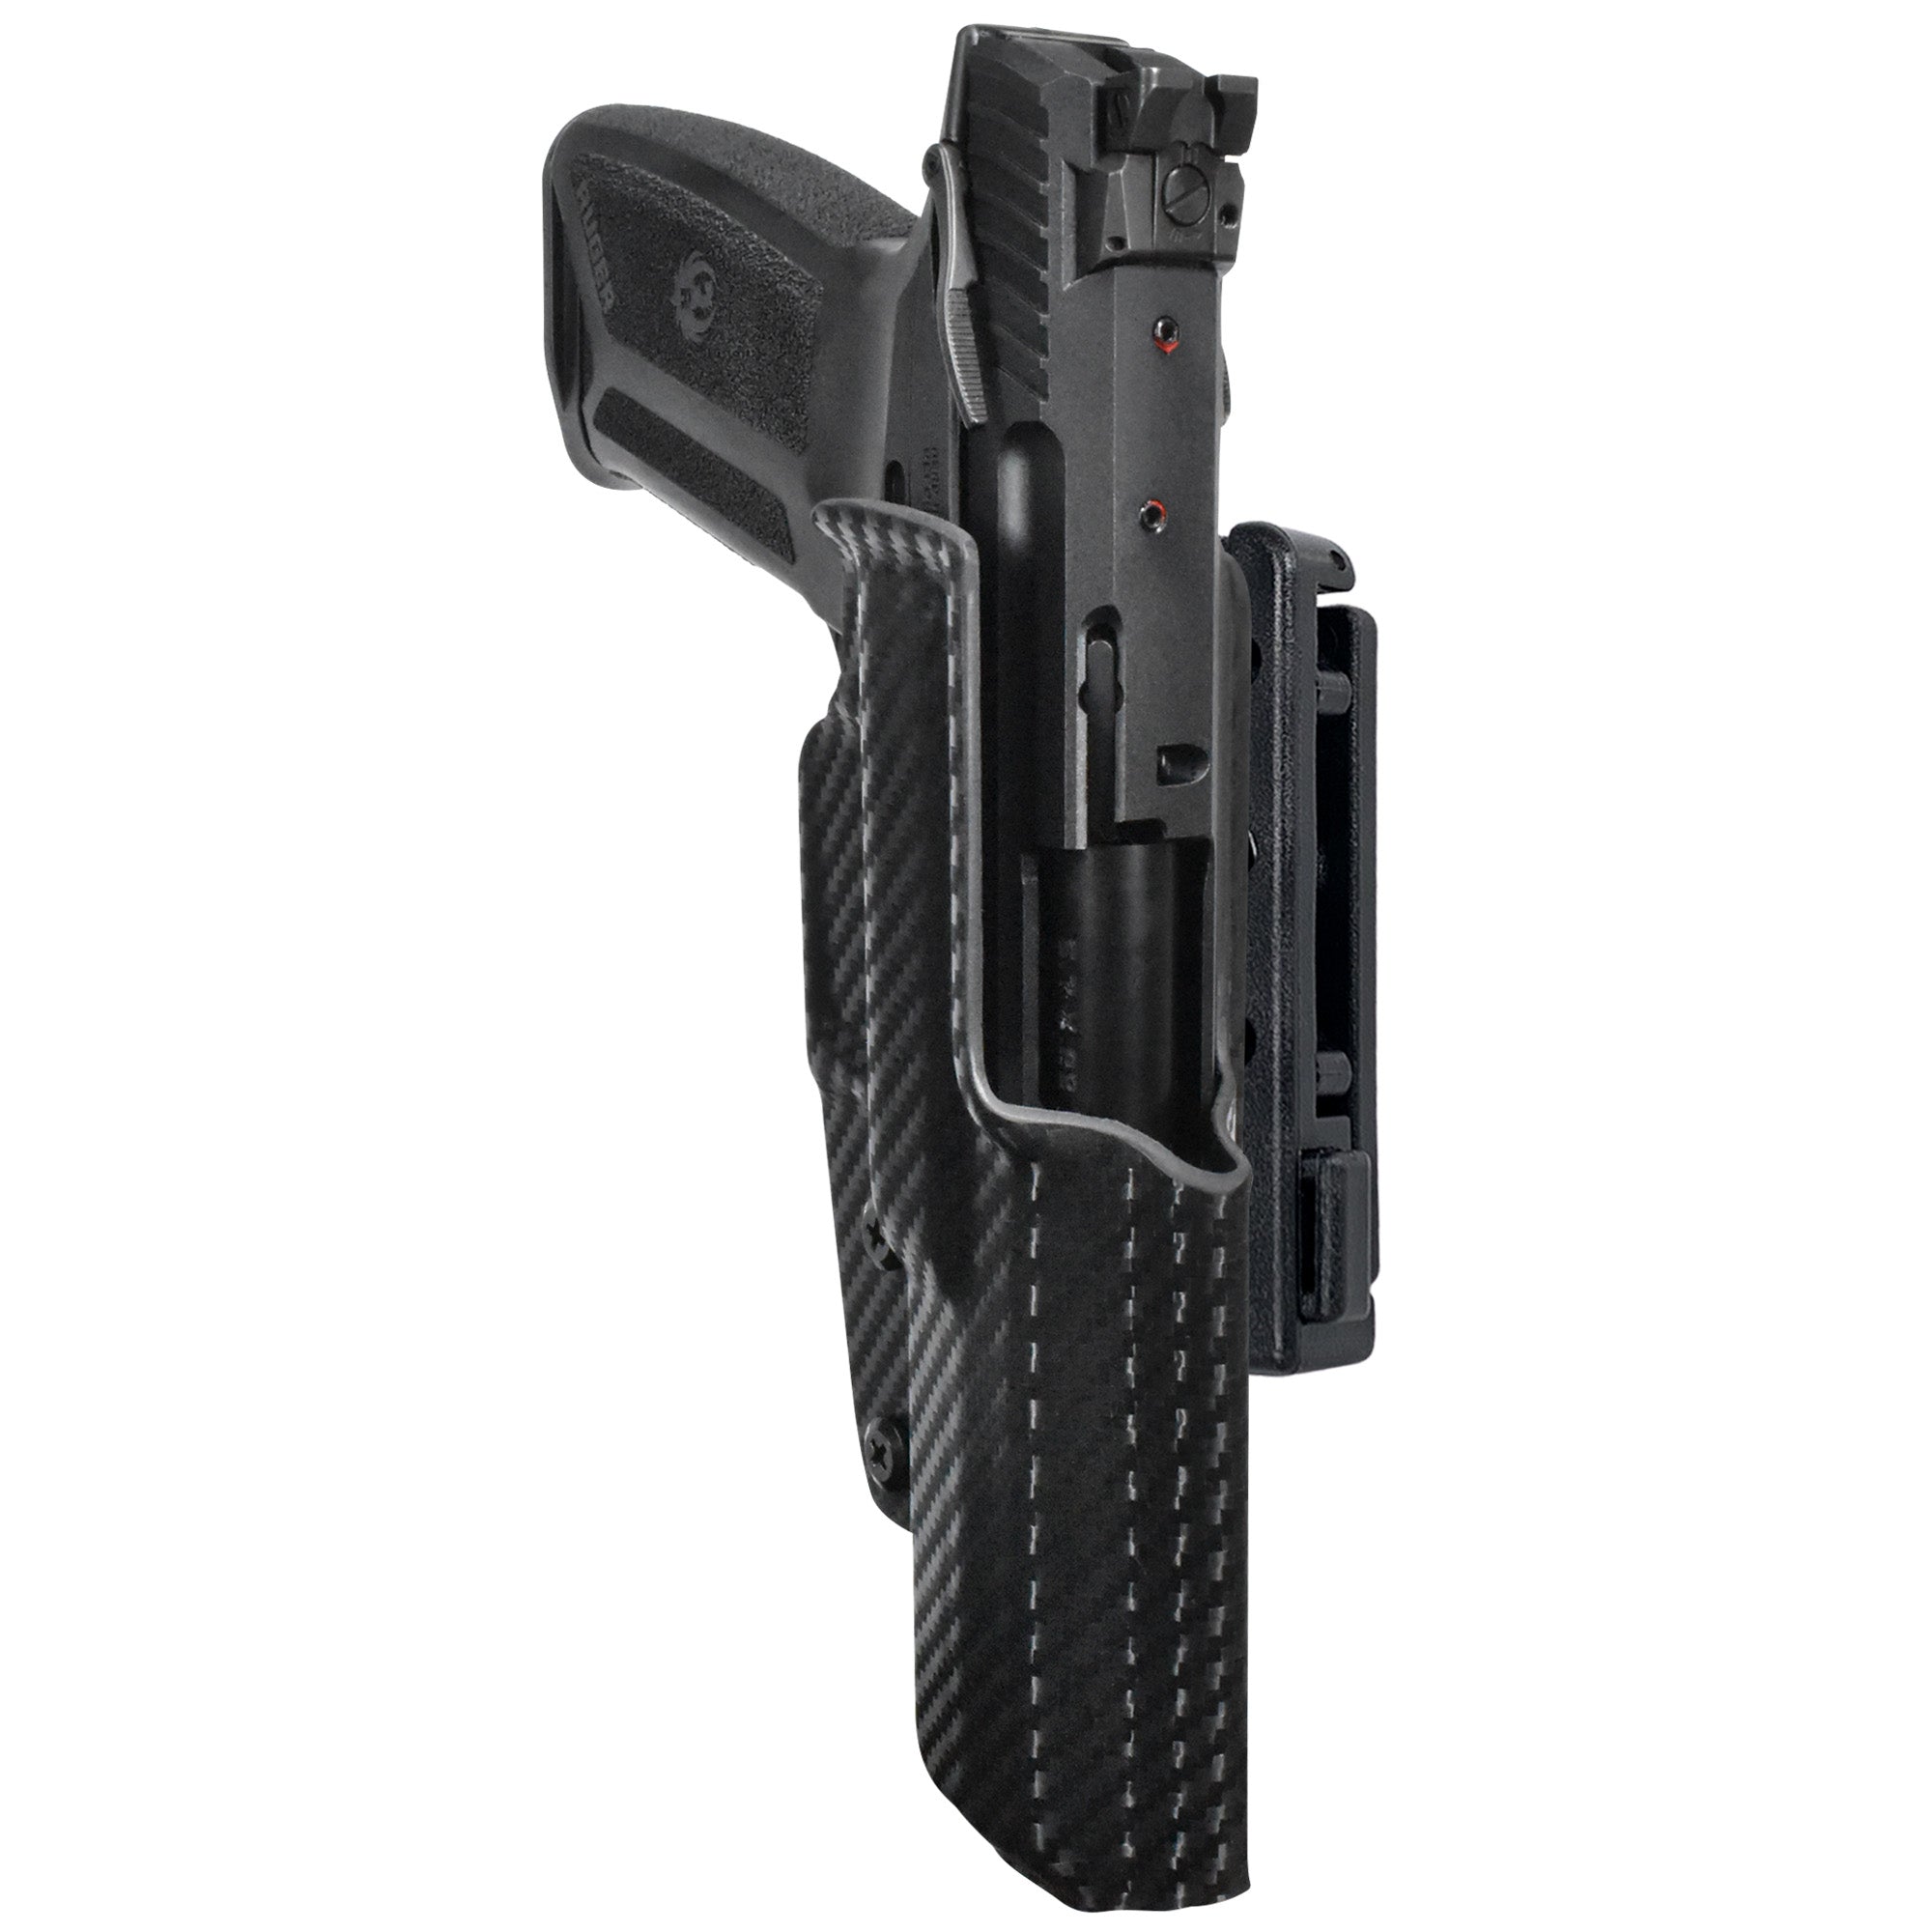 Ruger 5.7 Pro IDPA Competition Holster in Carbon Fiber